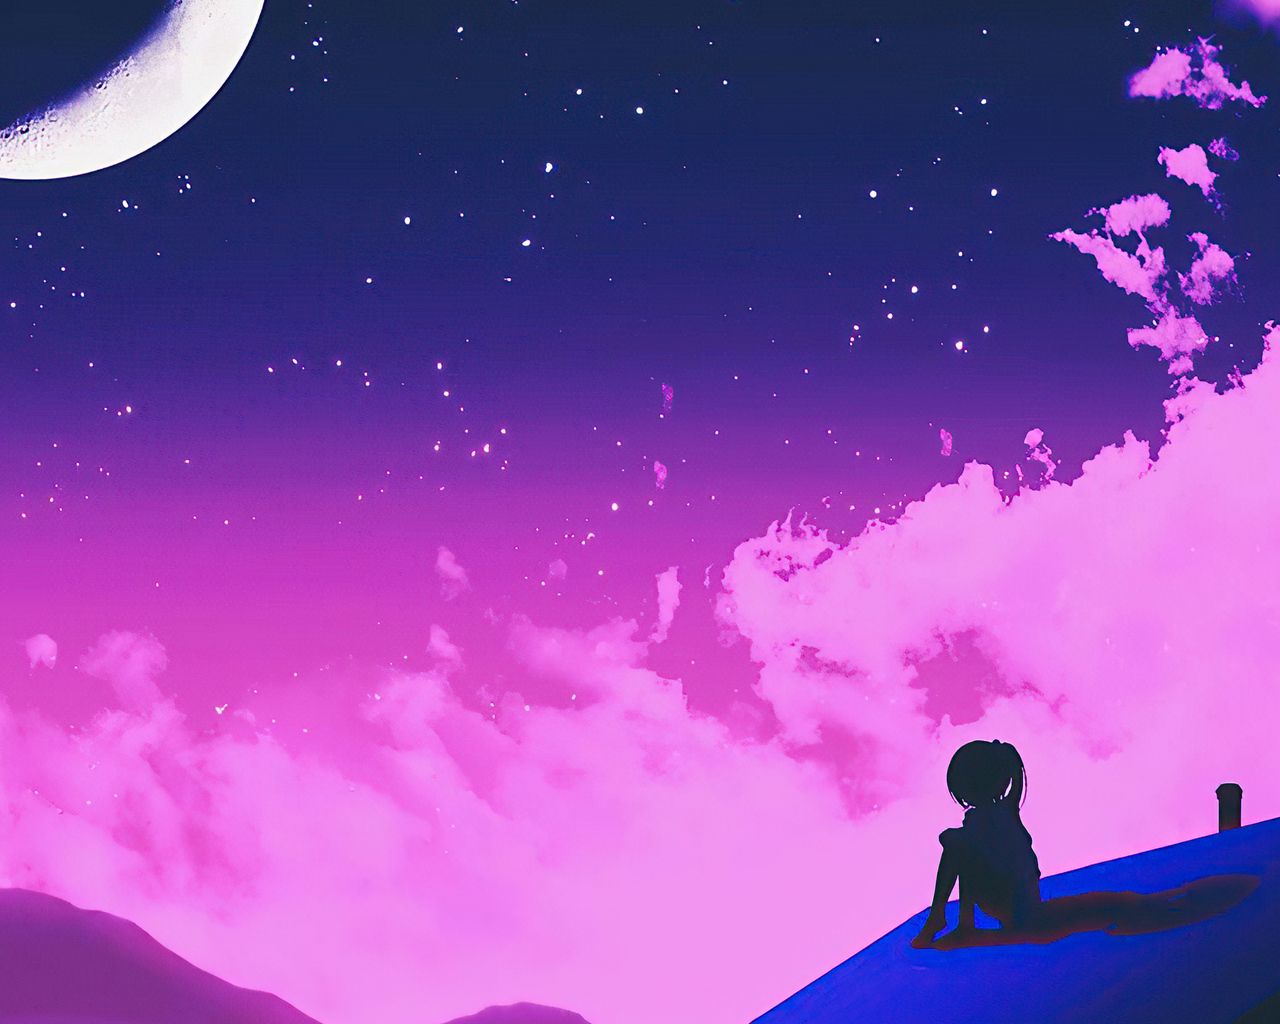 Anime girl sitting on a hill looking at the stars - 1280x1024